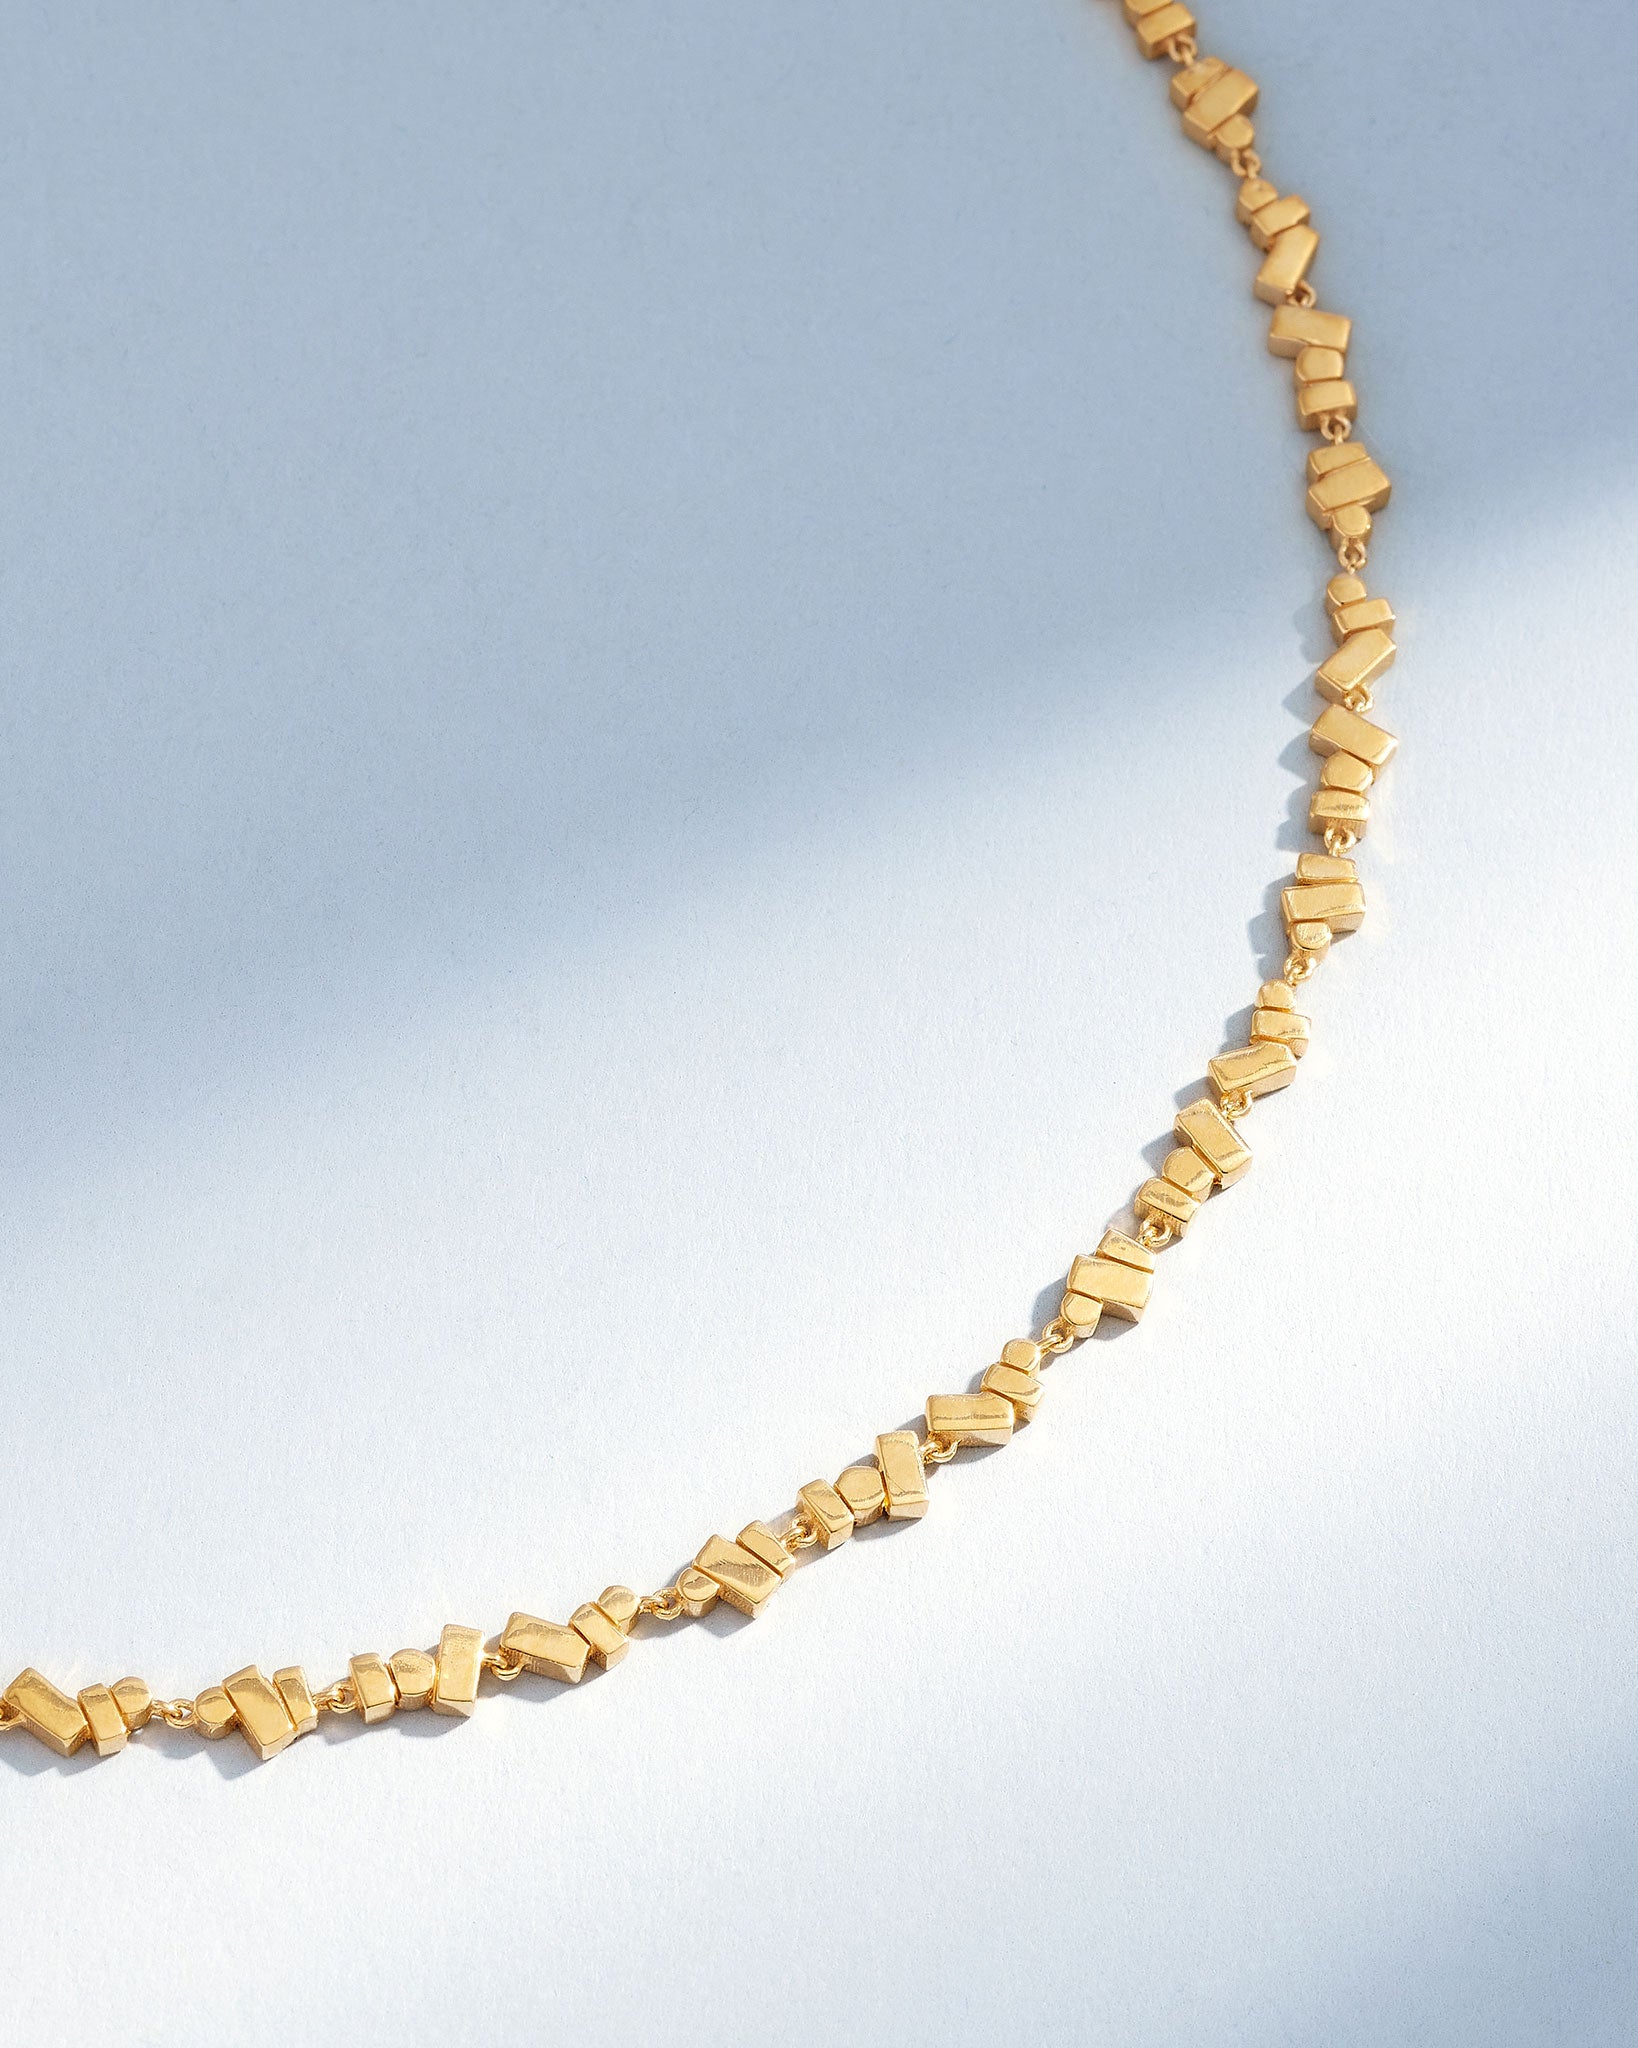 Suzanne Kalan Golden Cluster Tennis Necklace in 18k yellow gold